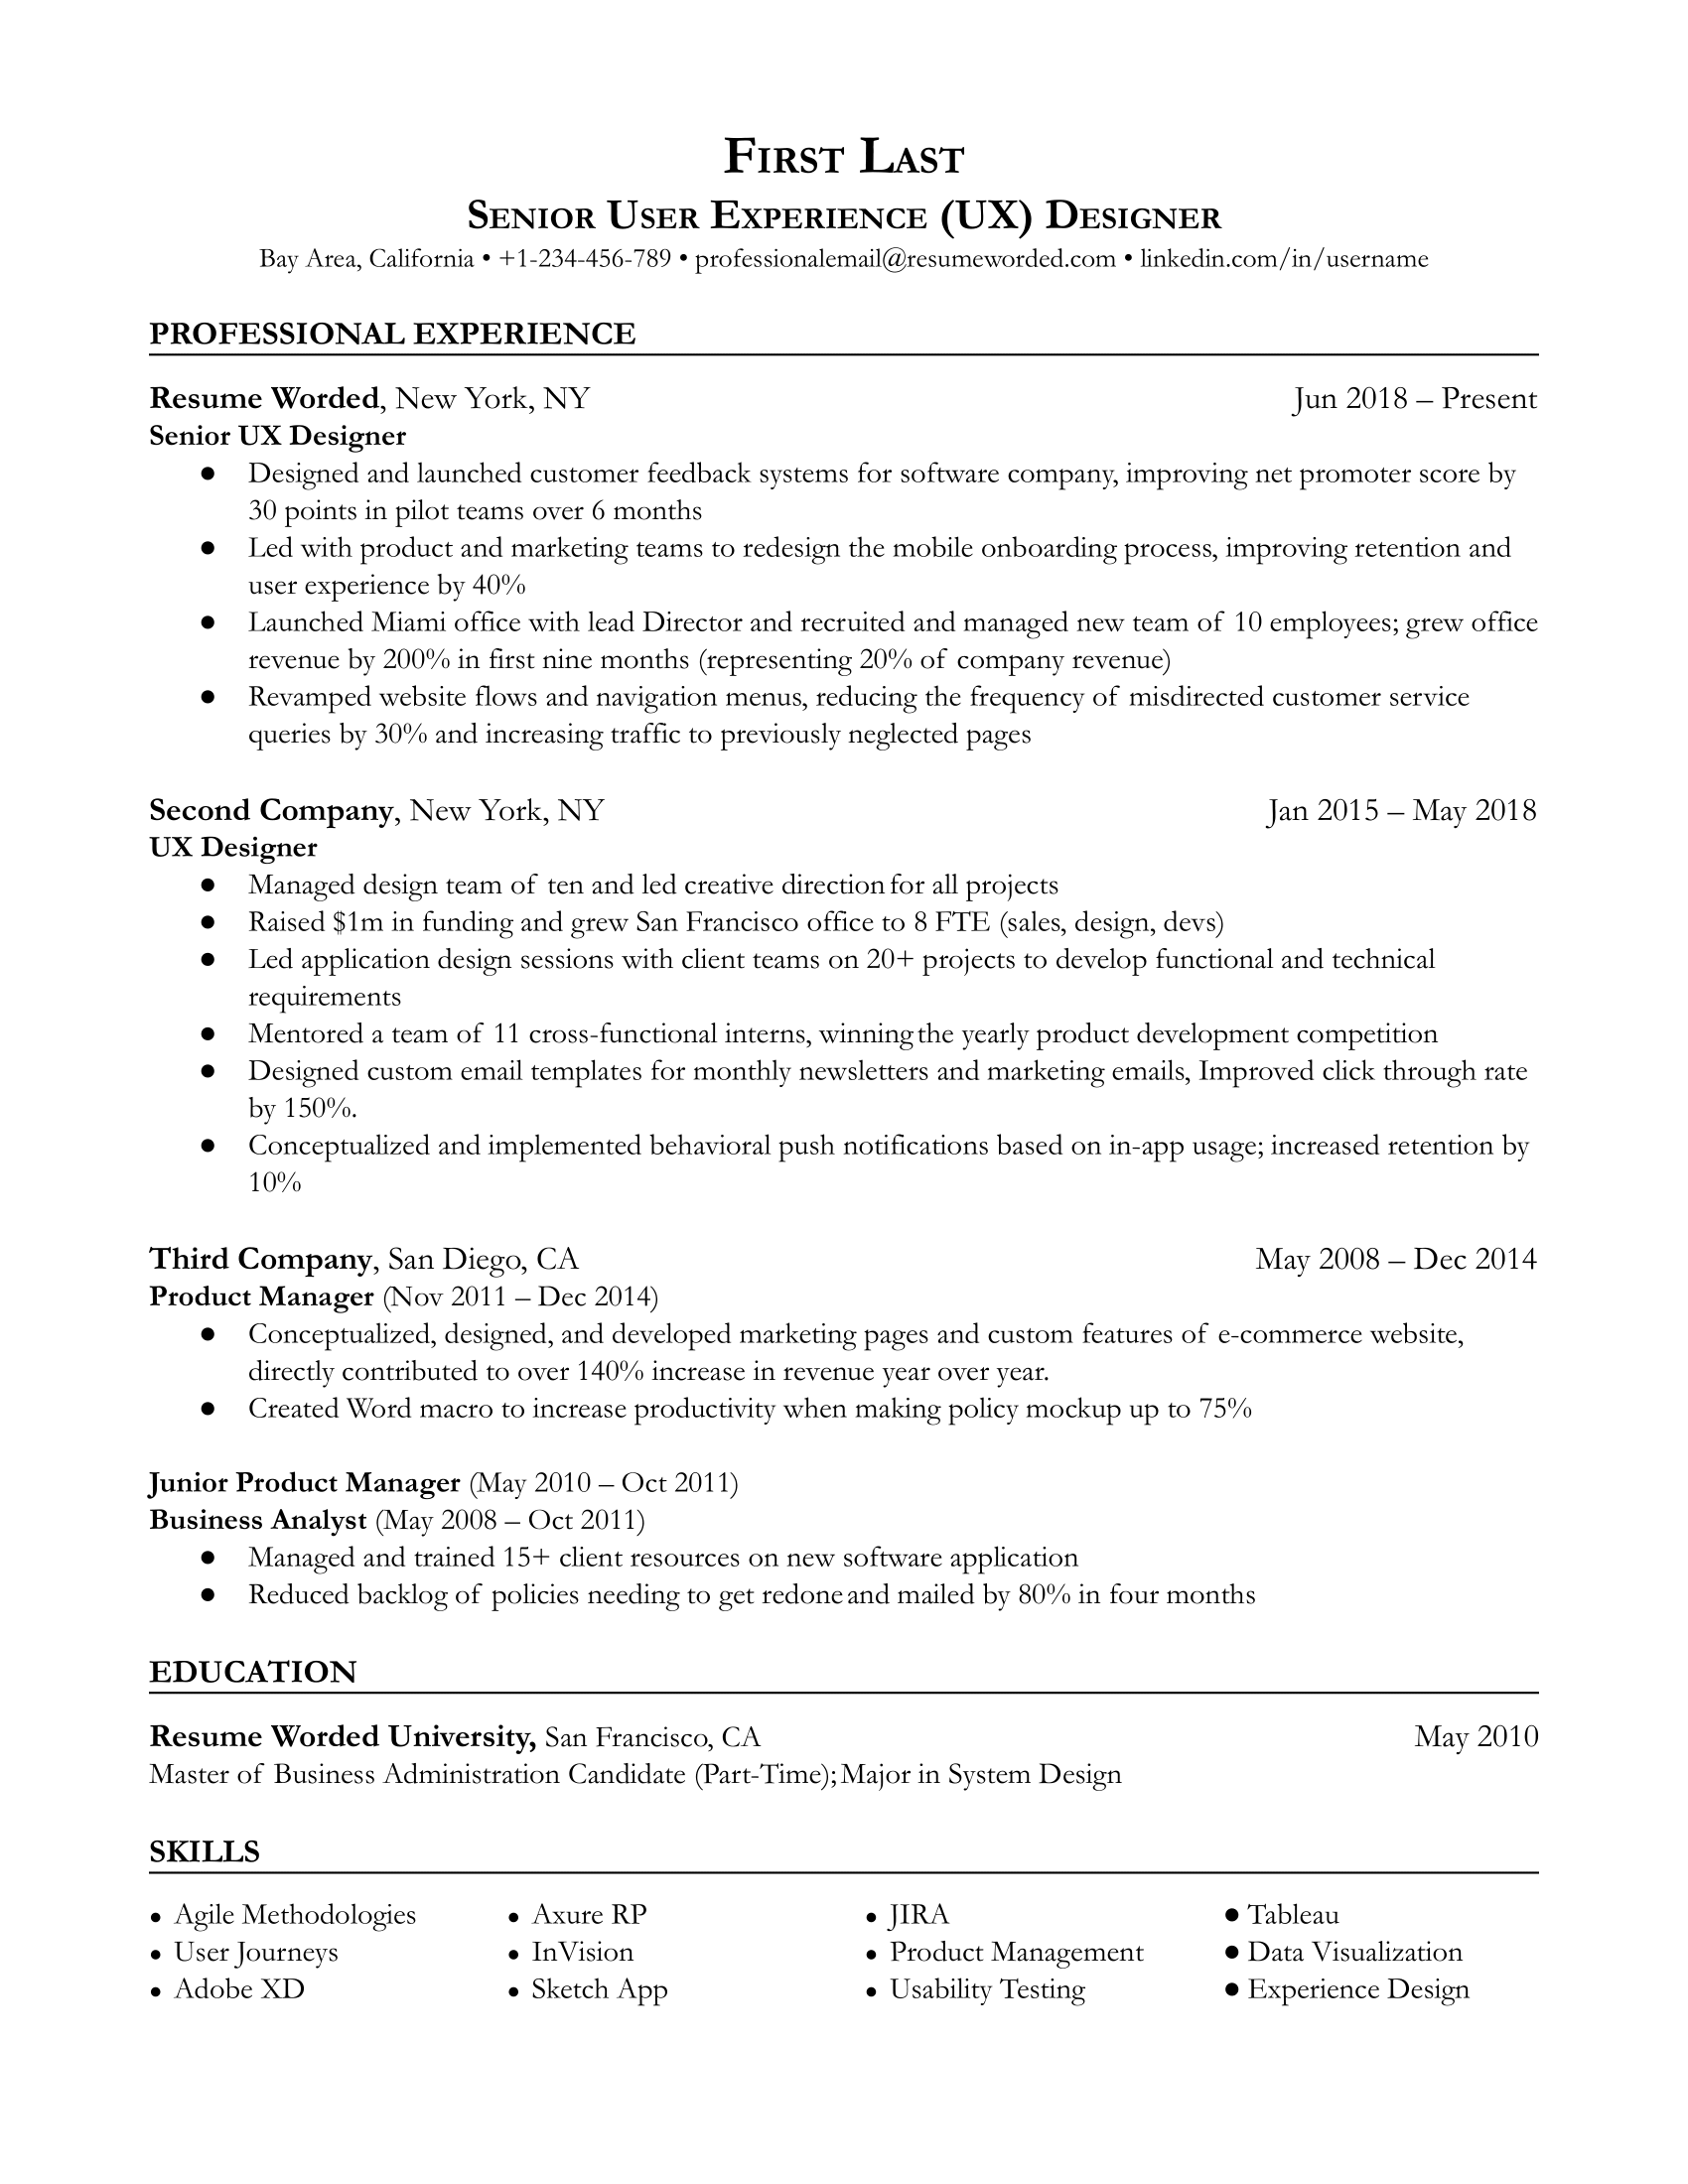 Resume example for a senior UX designer showcasing professional growth and leadership